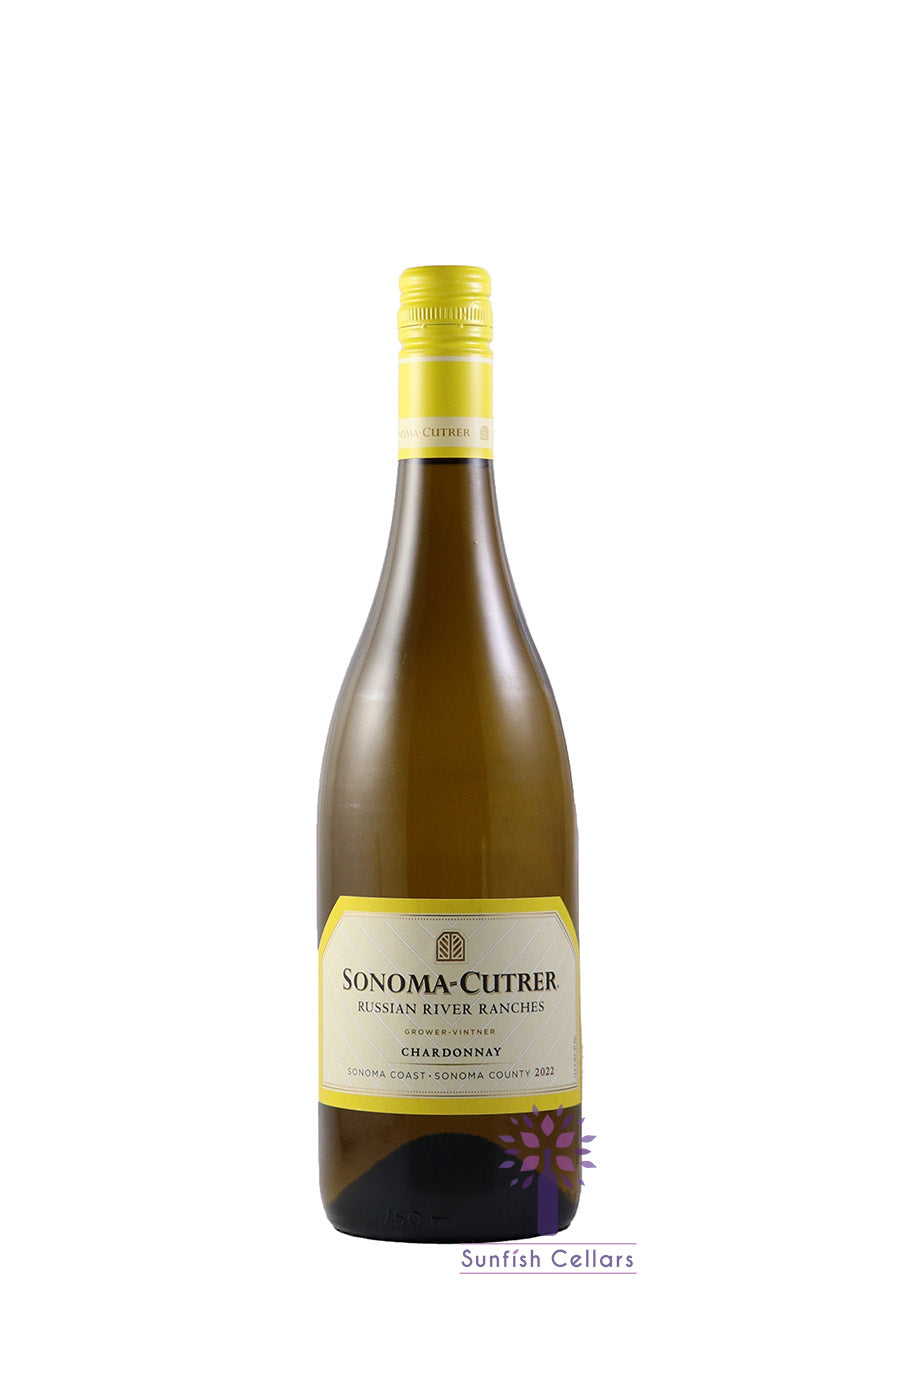 Sonoma-Cutrer Russian River Ranches Chardonnay 2022